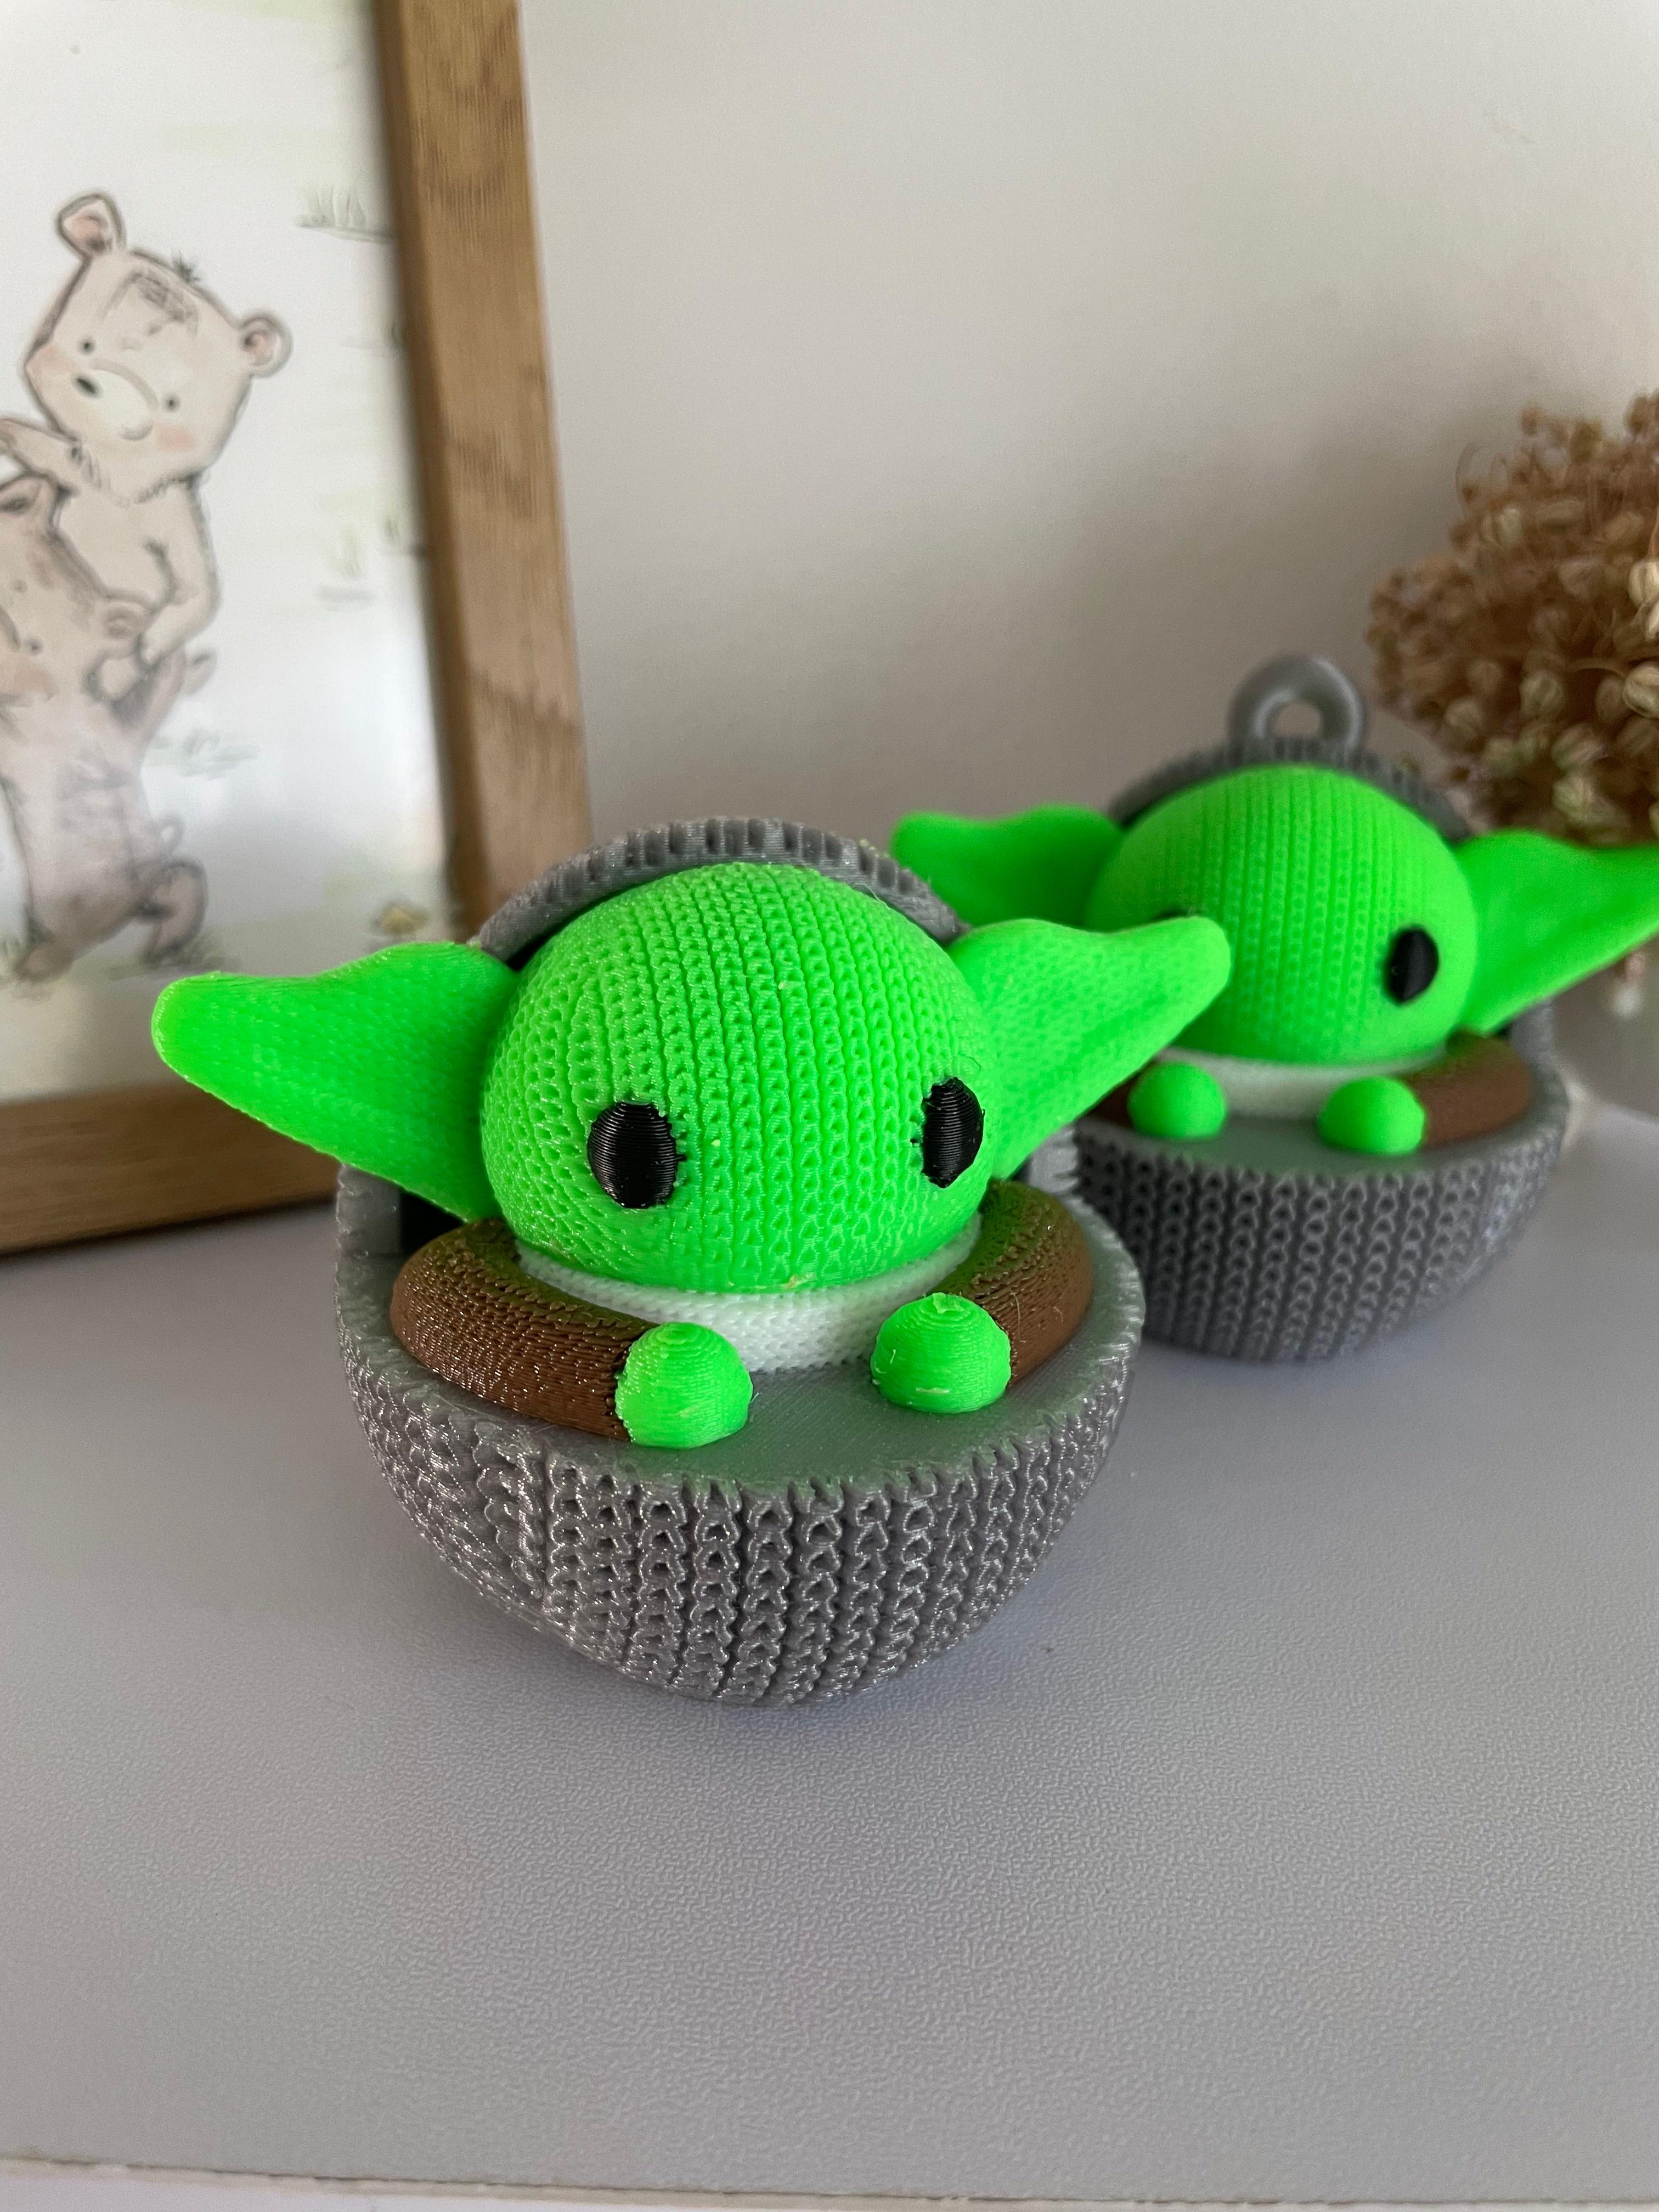 Knitted Star Wars Grogu Figurine / Ornament / No Supports / Multiparts / 3MF Included 3d model